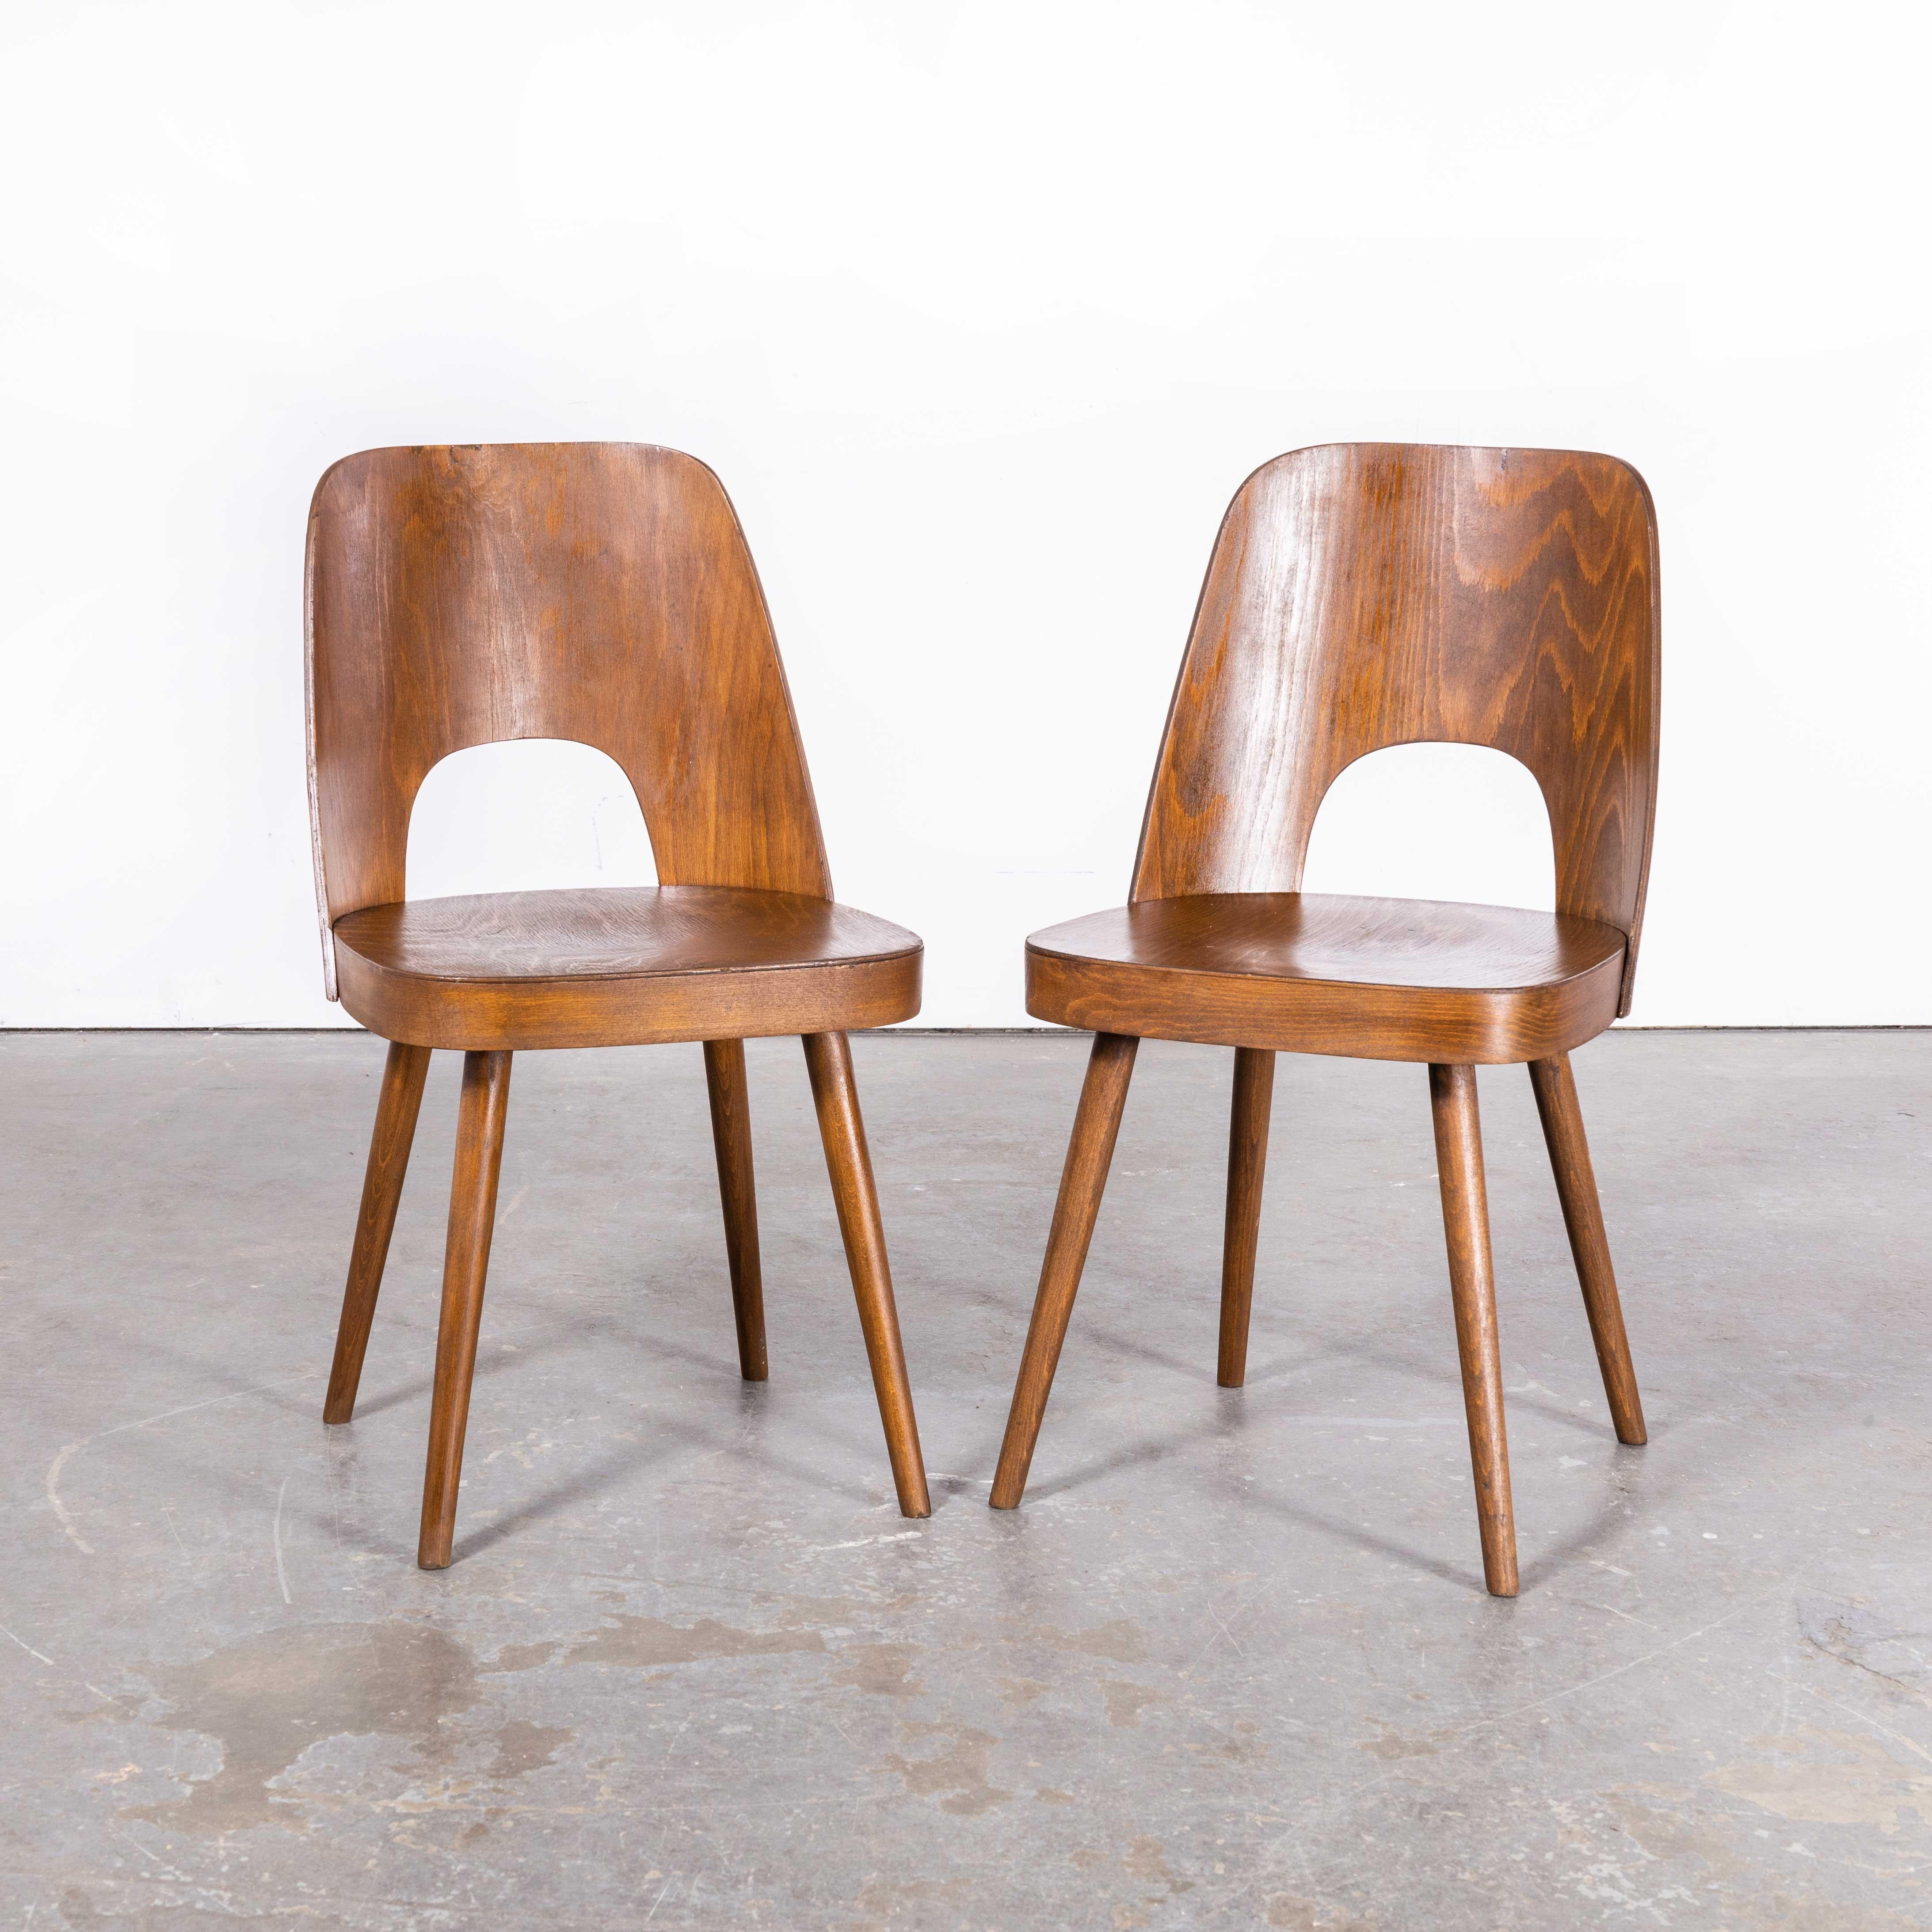 1950’s Dark Oak Dining Side Chair – Oswald Haerdtl Model 515 – Pair
1950’s Dark Oak Dining Side Chair – Oswald Haerdtl Model 515 – Pair. These chairs were produced by the famous Czech firm Ton, still trading today and producing beautiful furniture,